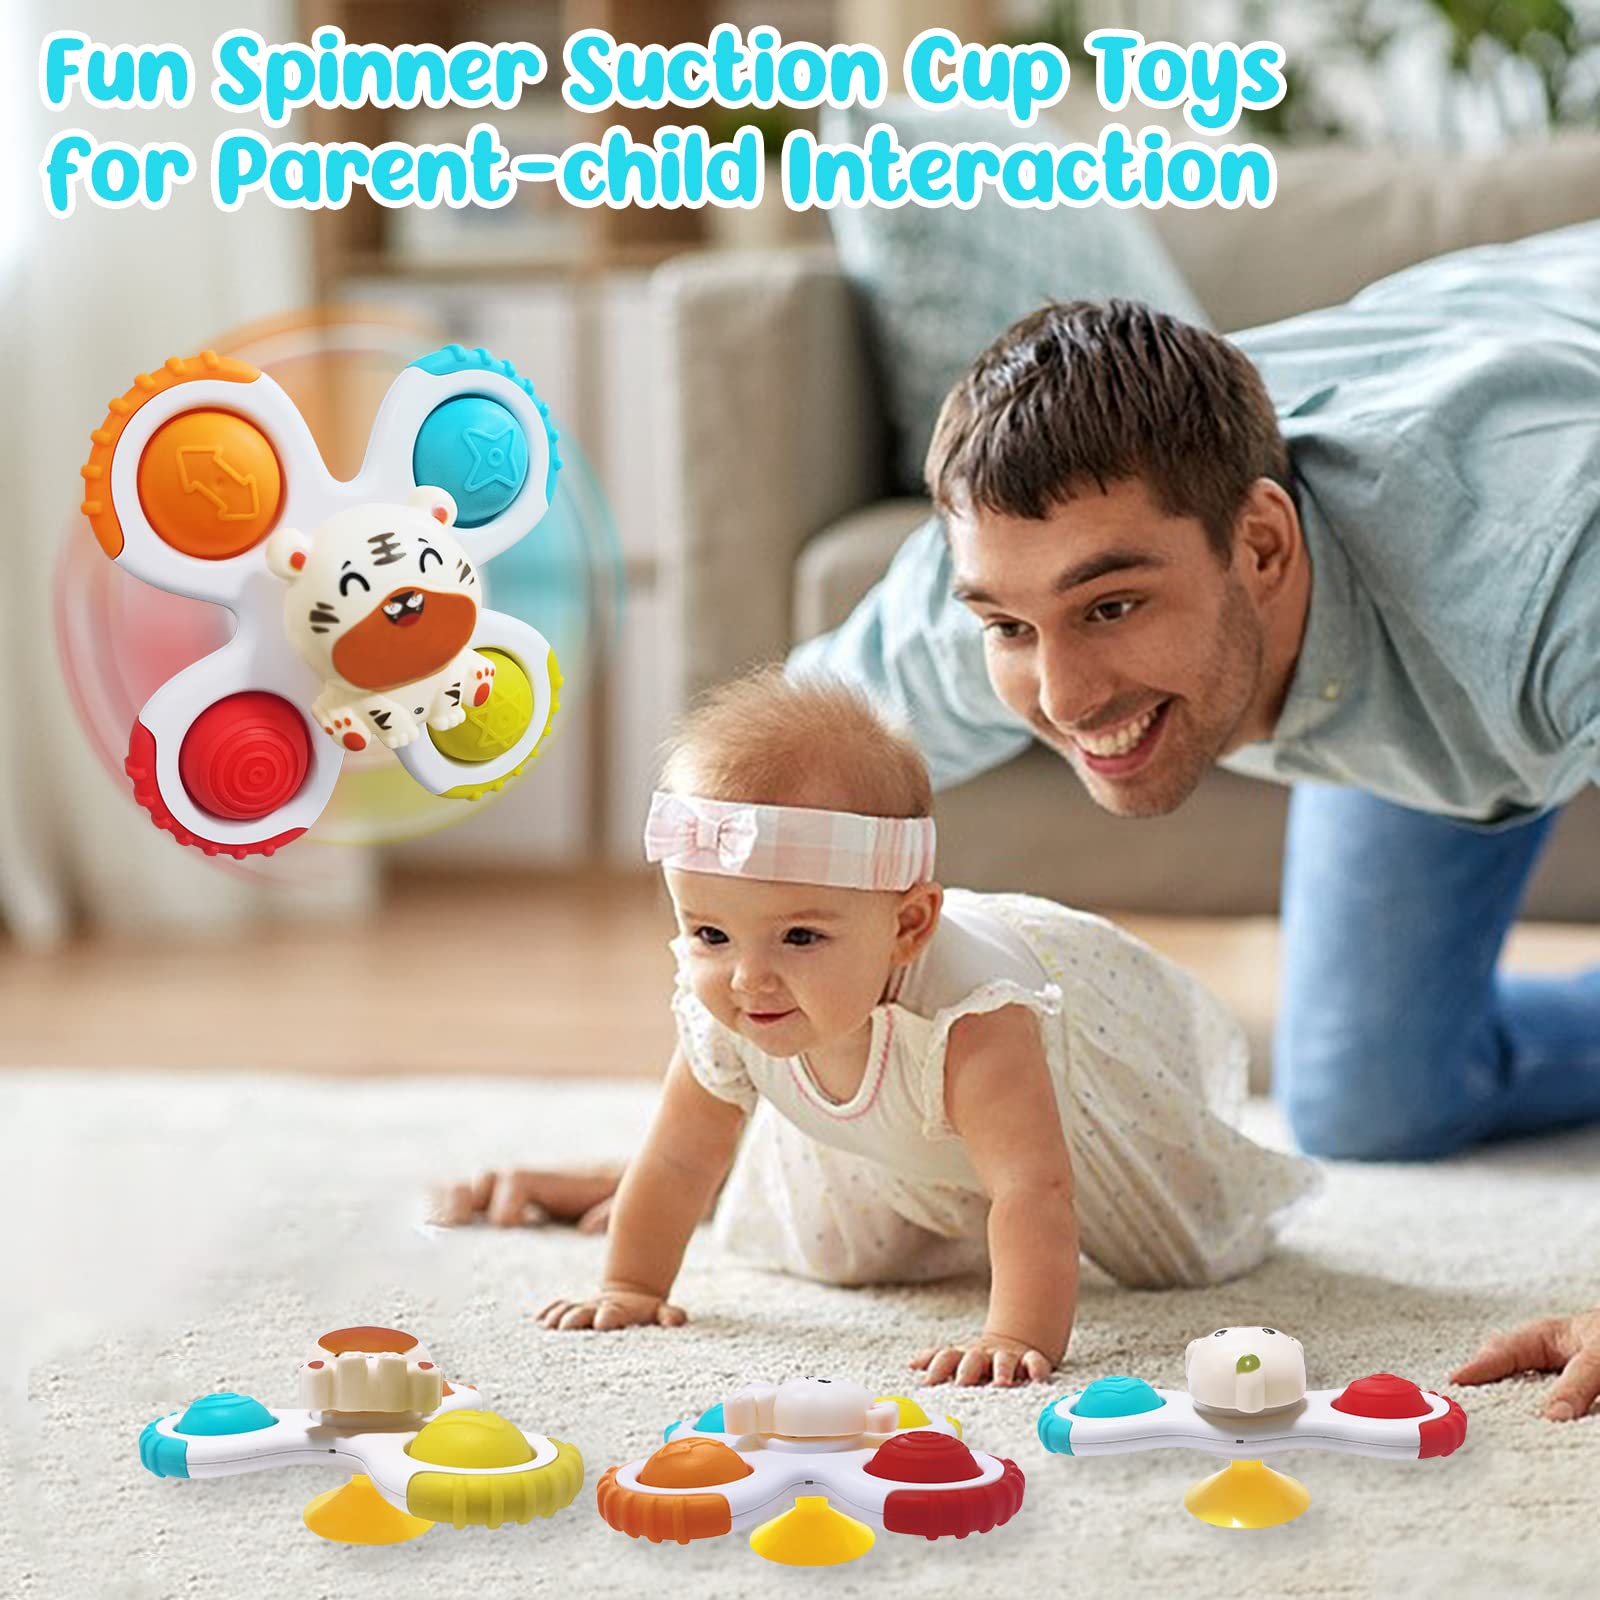 3PCS Suction Cup Spinner Toy for Baby, Bath Toys for Toddlers 1-3, Baby Spinners with Suction Cups, Window Travel Suction Cup Toys, Baby Toys for 1 Year Old, Sensory Bath Toys Gifts for Boys Girls